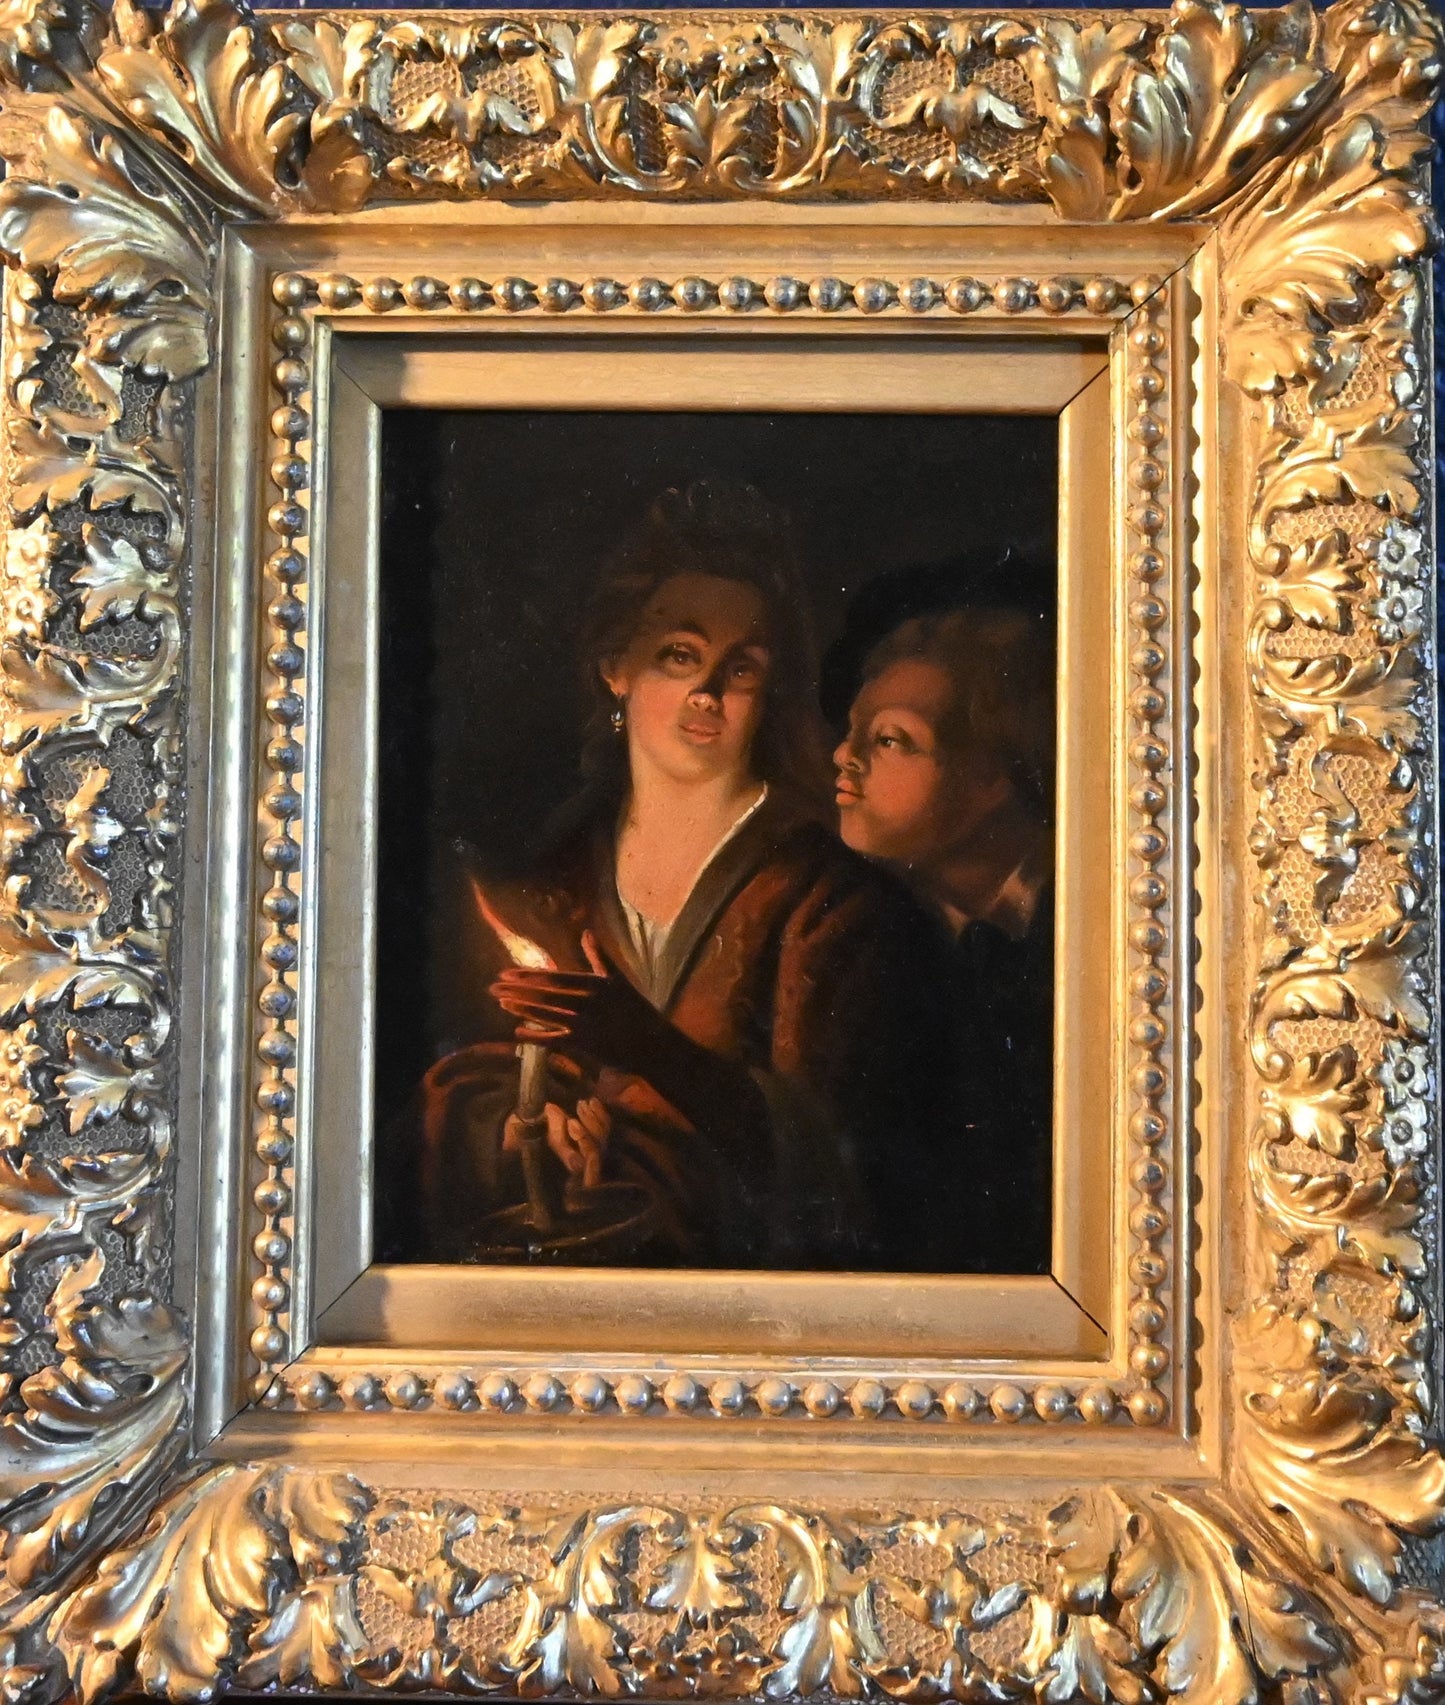 Godfried Schalcken (Dutch 1643 - 1706) Original Oil VERY High prices Sotheby's & Christies- 15" X 12 3/4" exhibited at numerous Museums